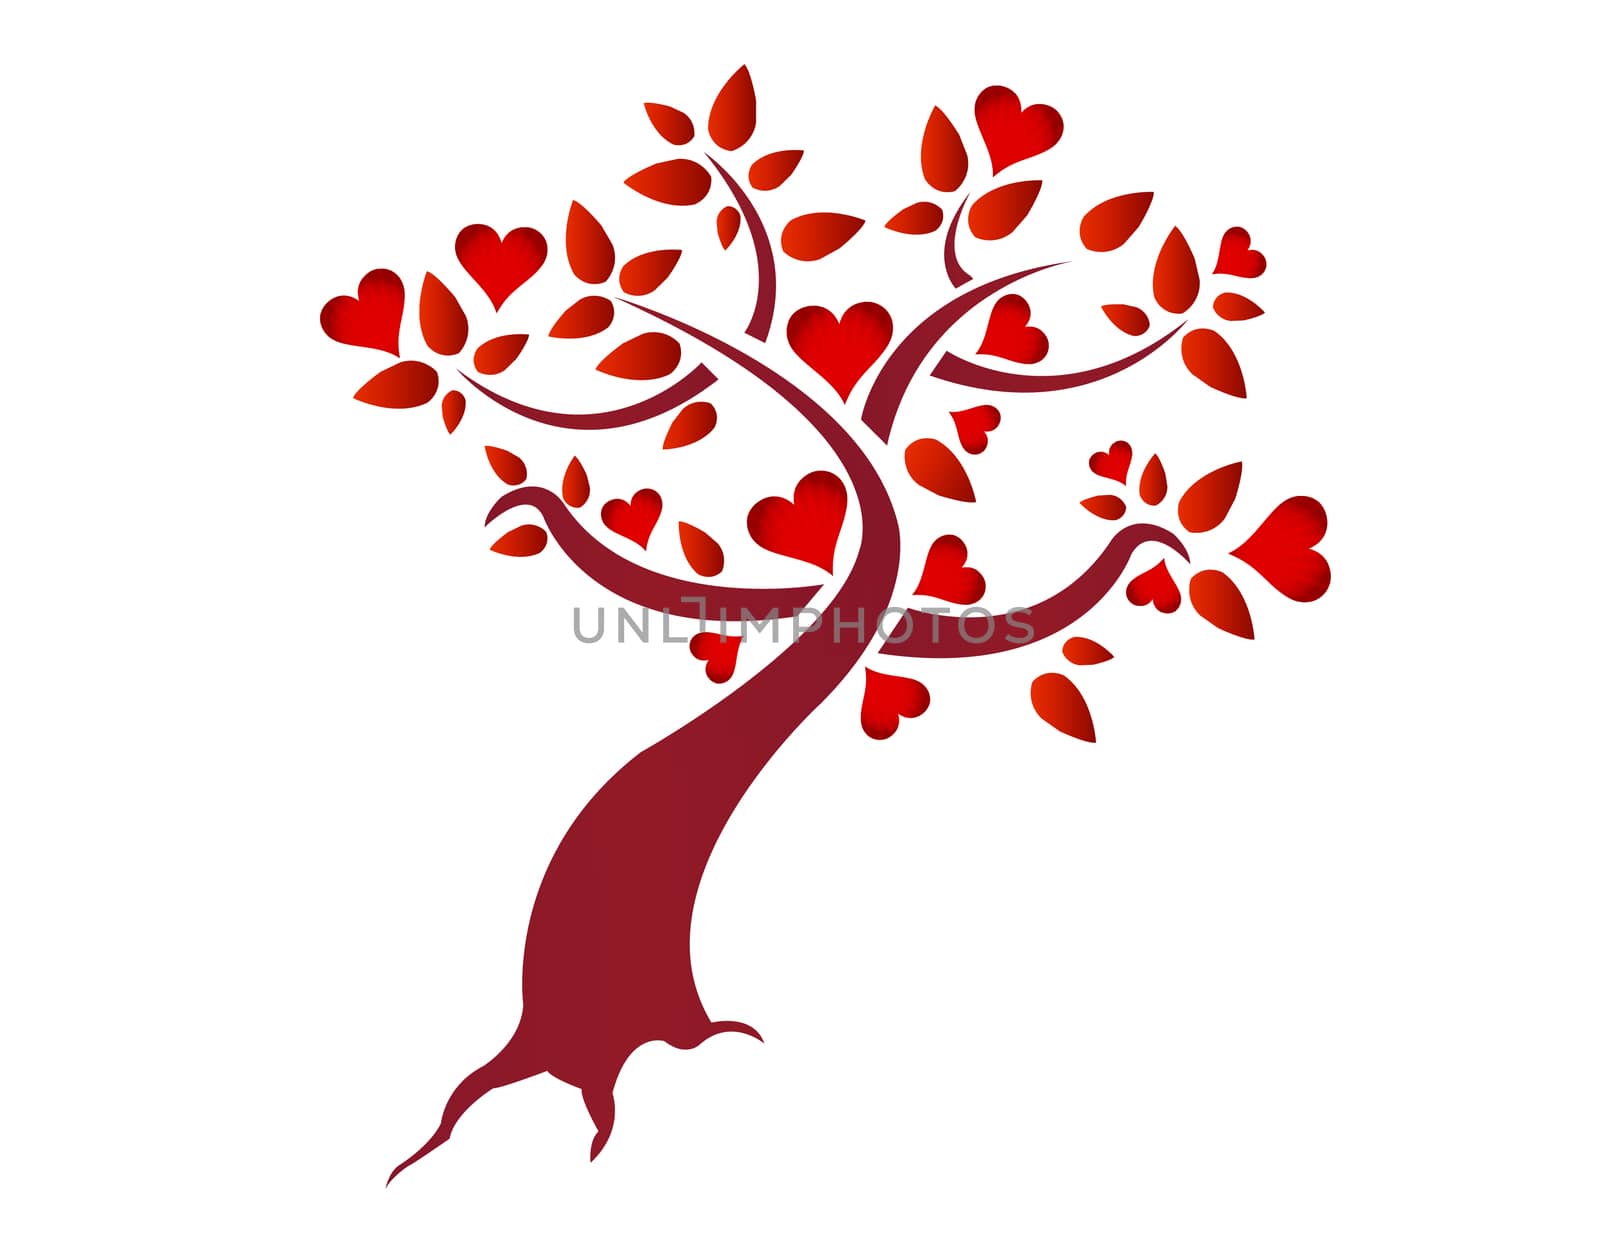 Heart tree illustration design isolated over a white background by alexmillos